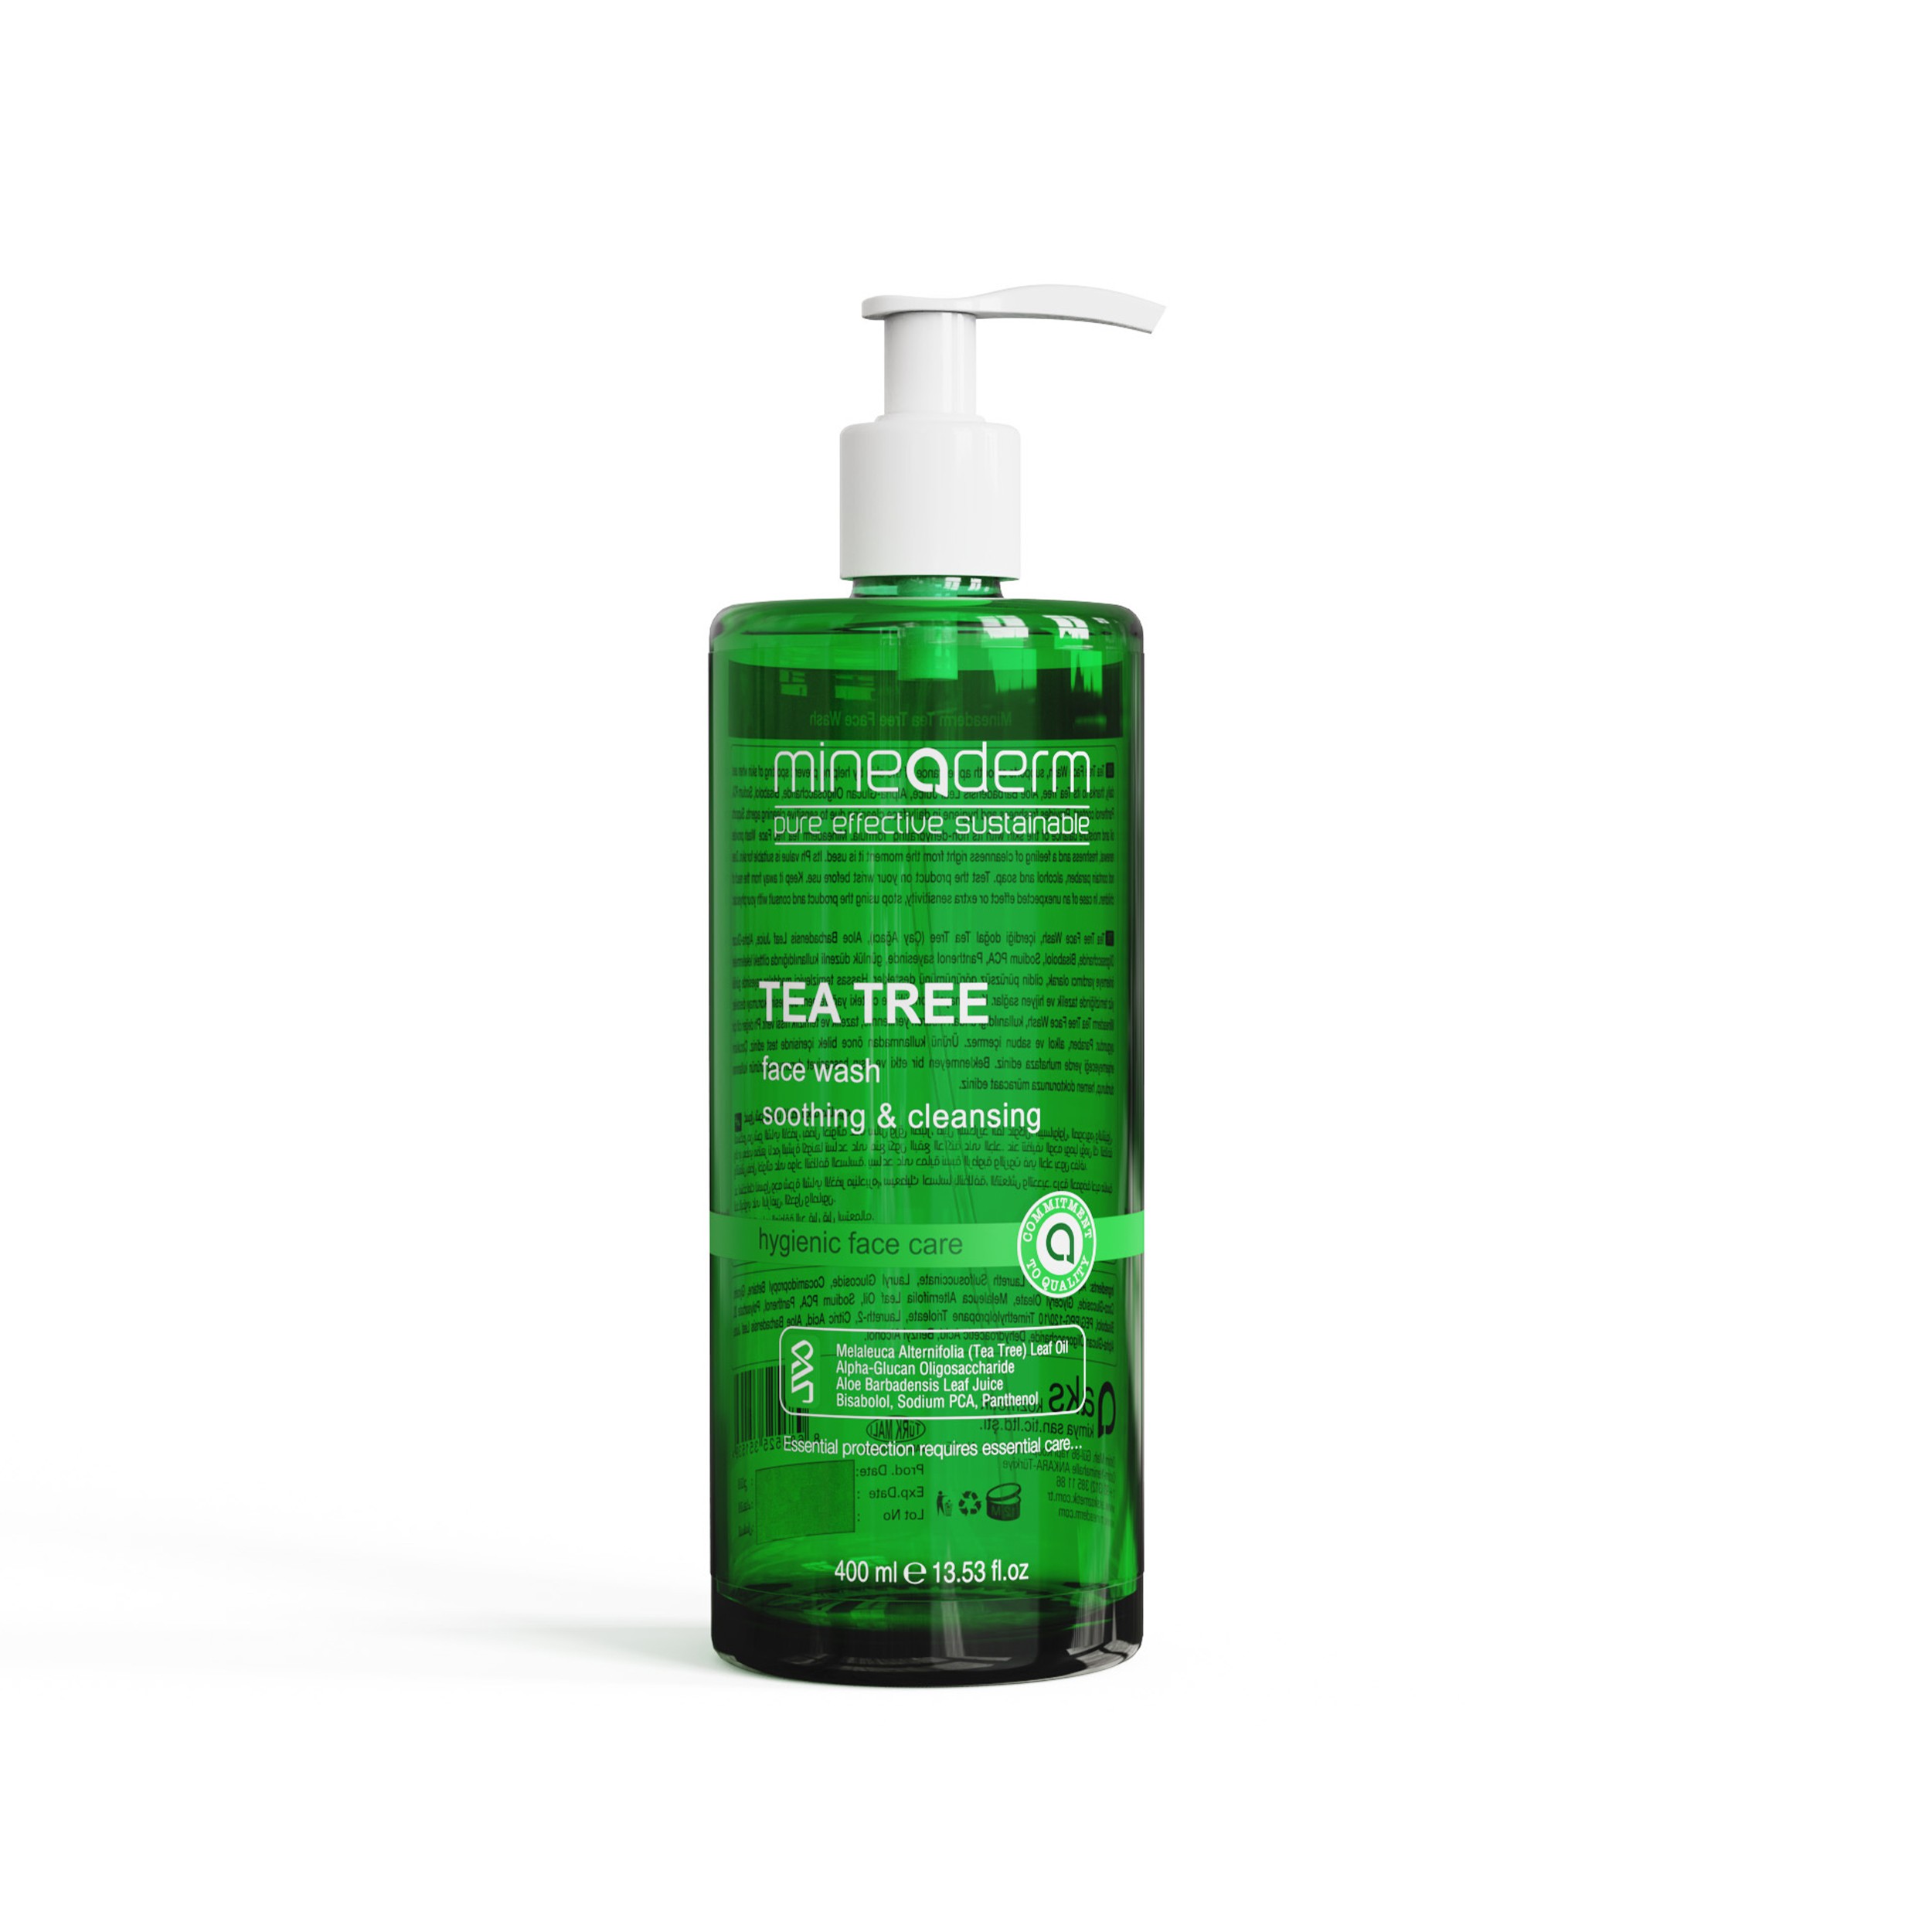 TEA TREE FACE AND BODY WASH